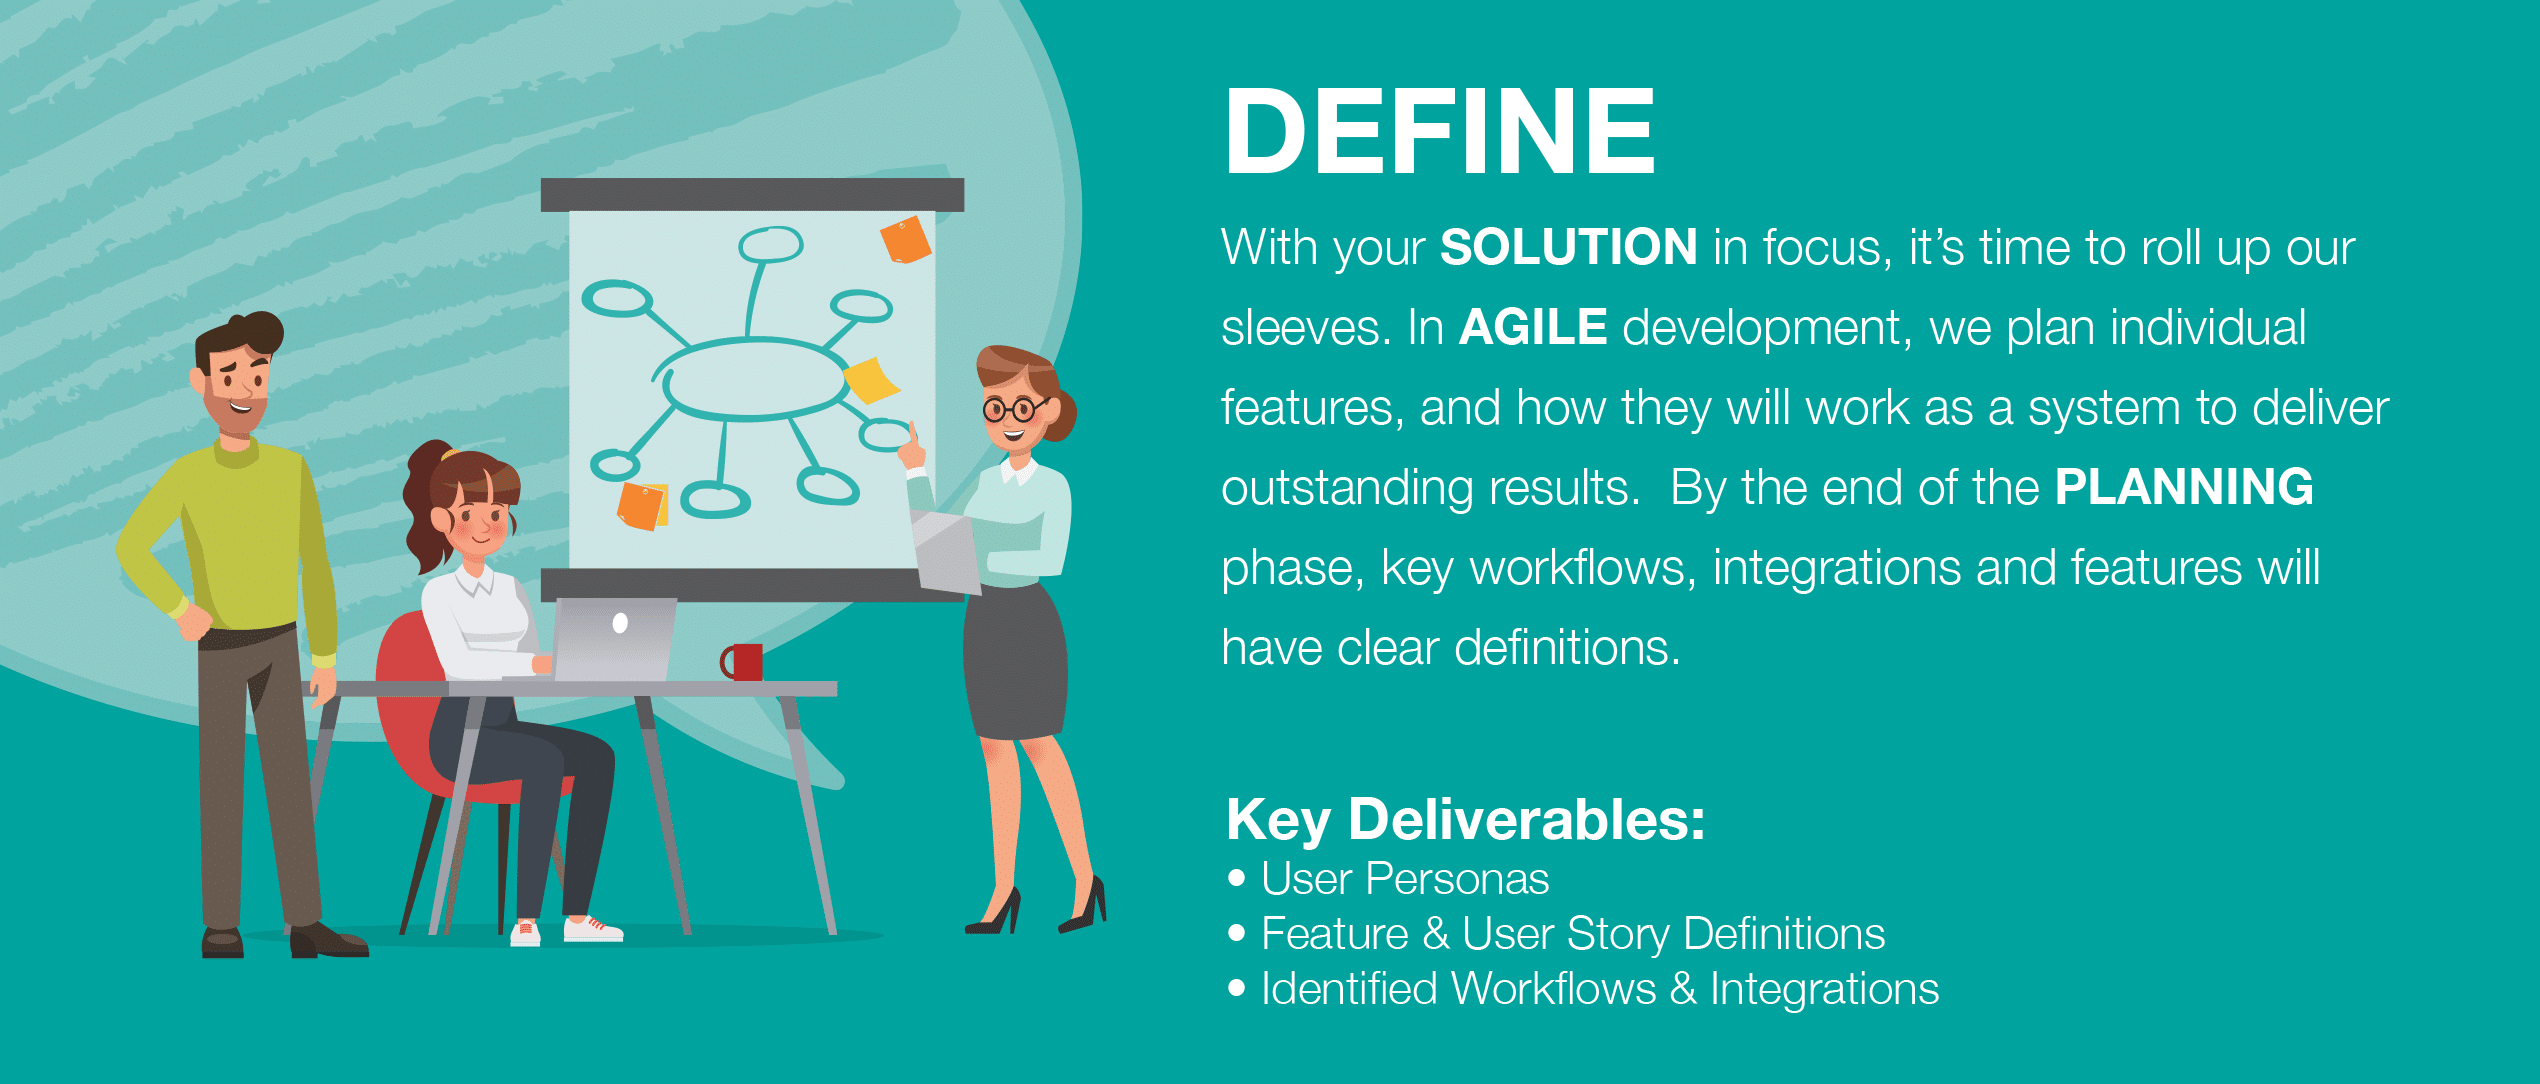 D(Define) from IDEATE